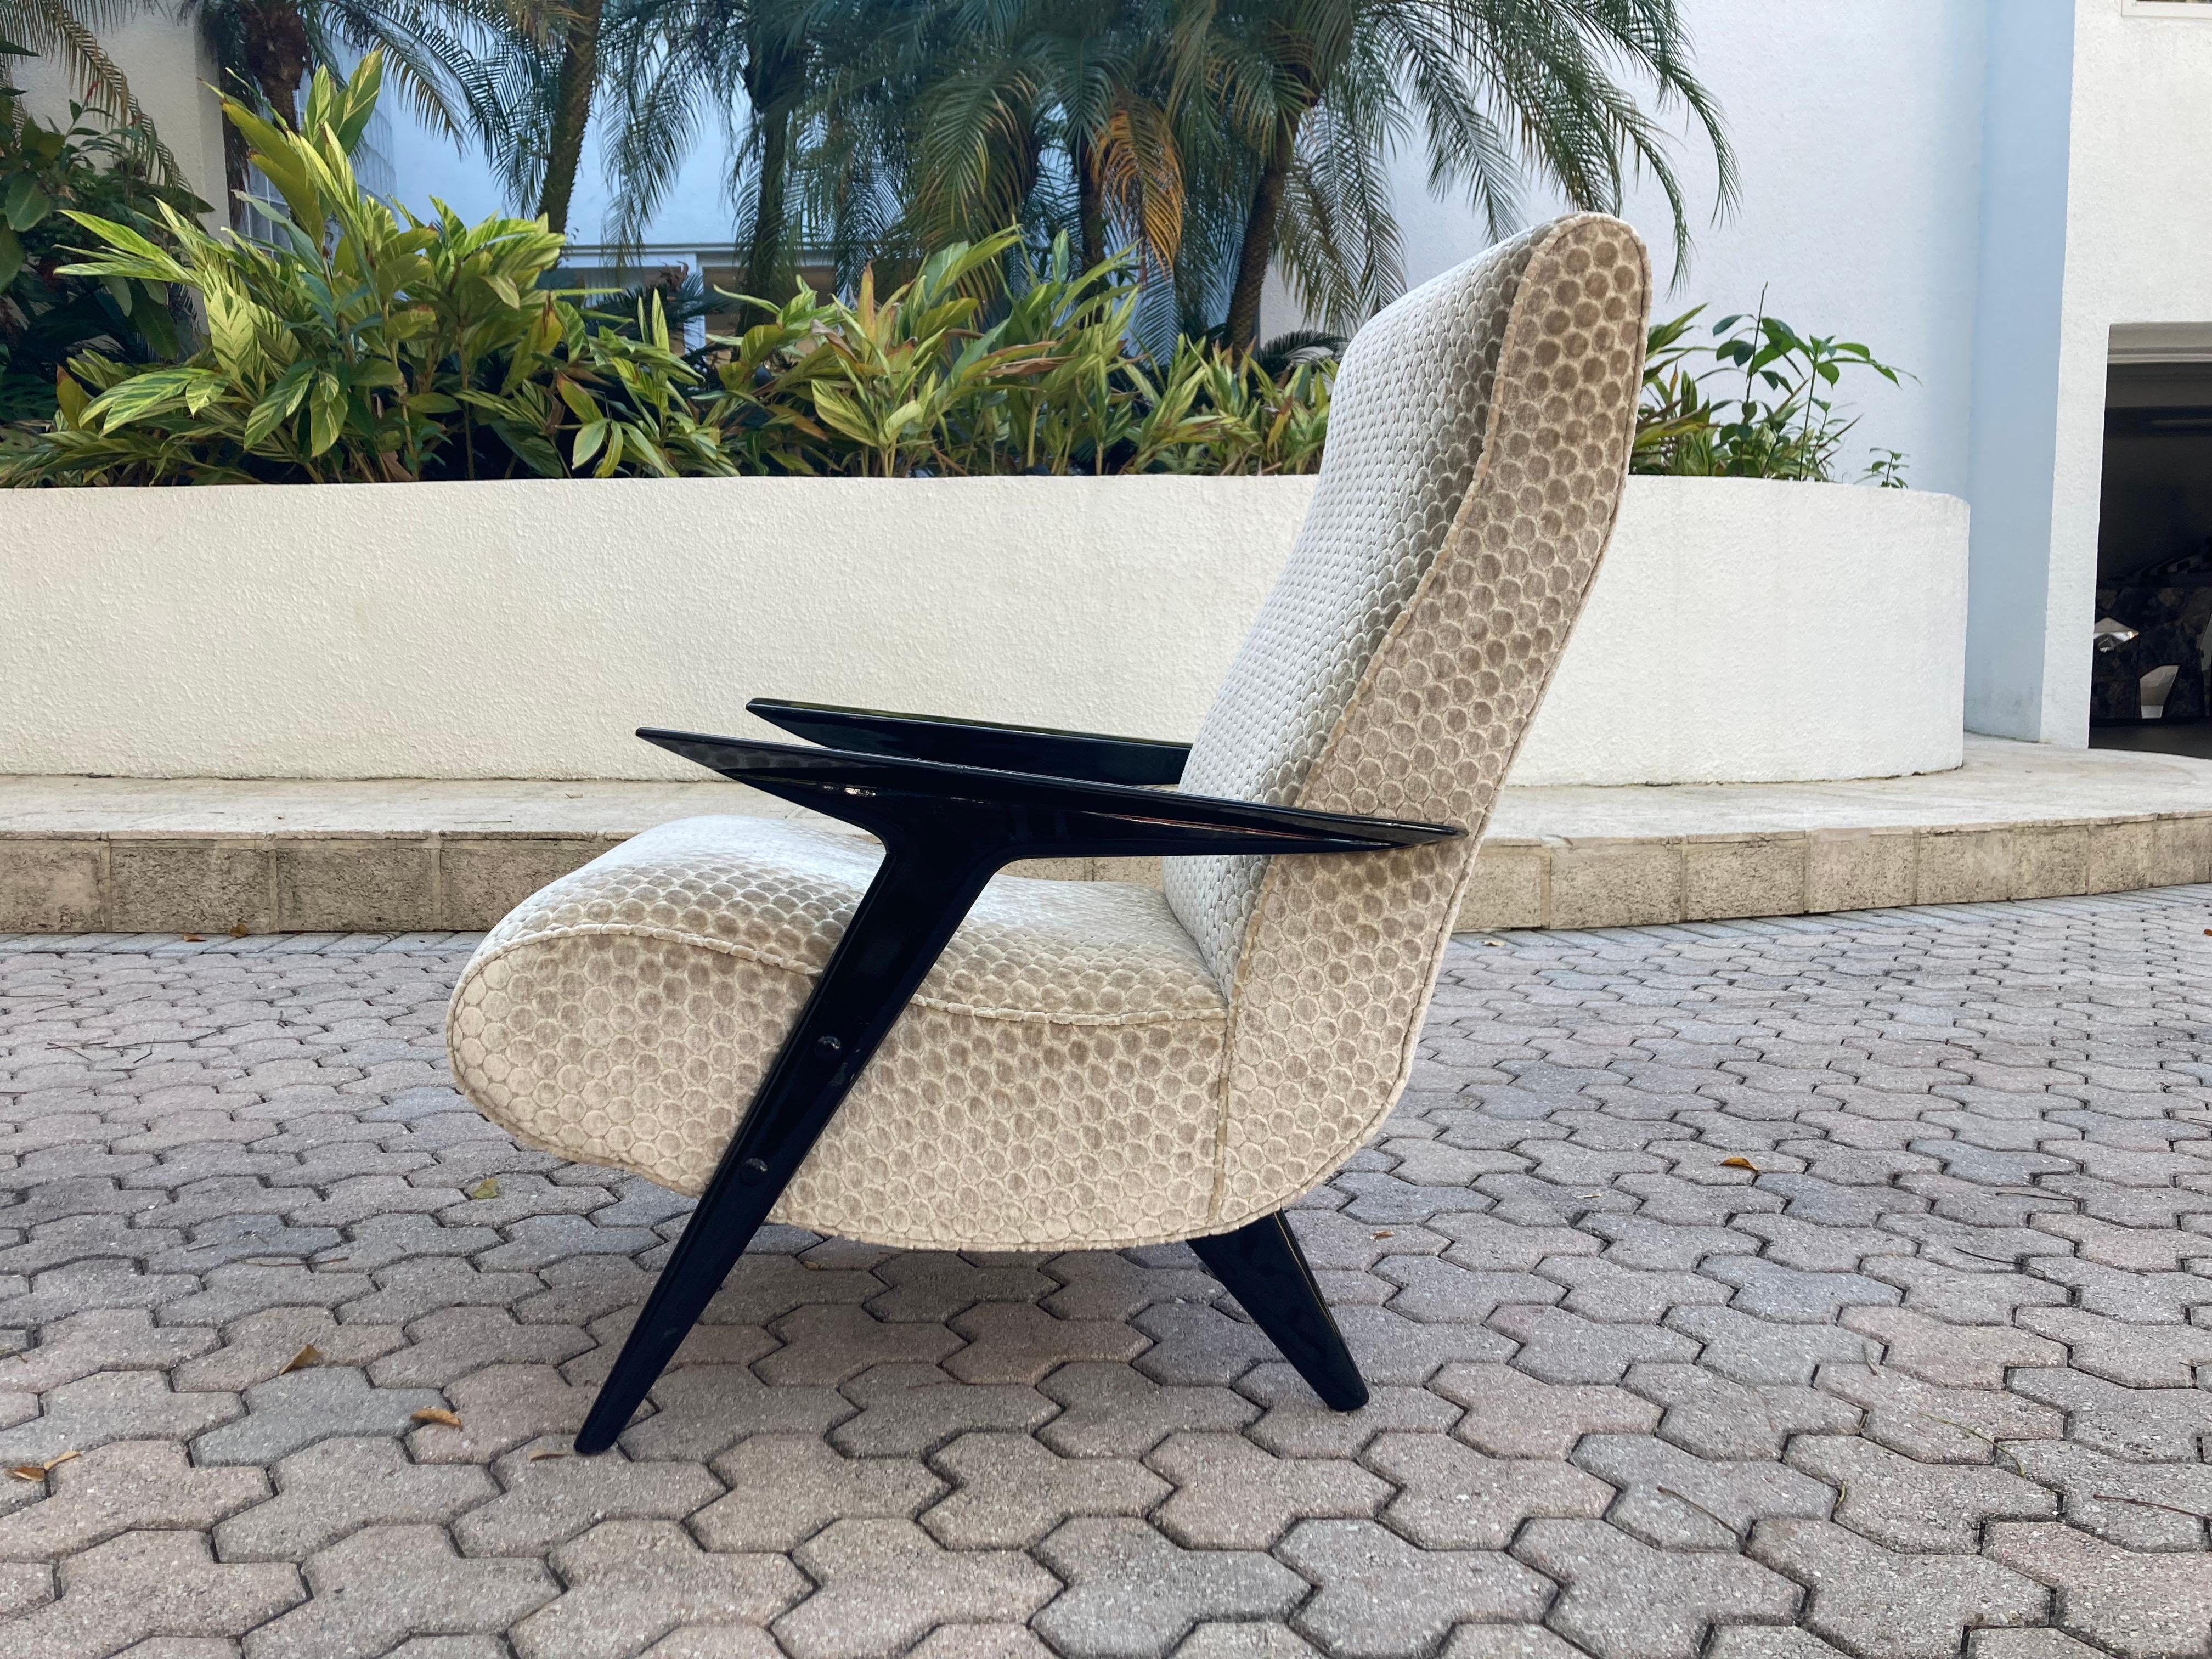 Italian lounge chair from the 1960s, black painted wood and arms and legs and fabric covered seat and back.